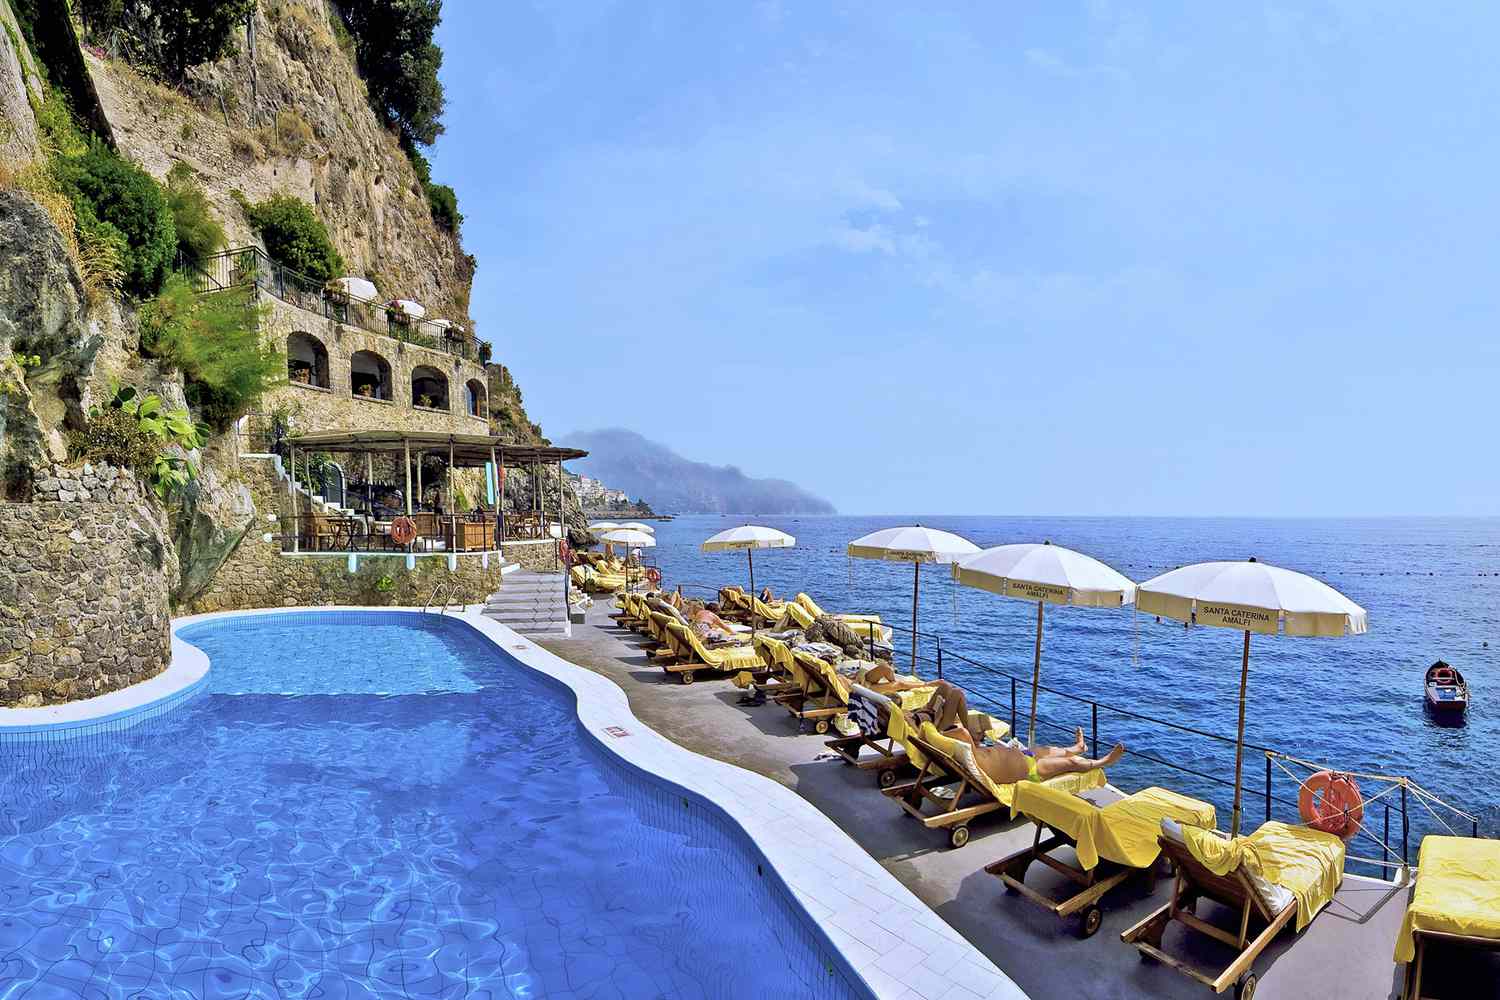 Swimming pool and lounge seating with view of water at Hotel Santa Caterina